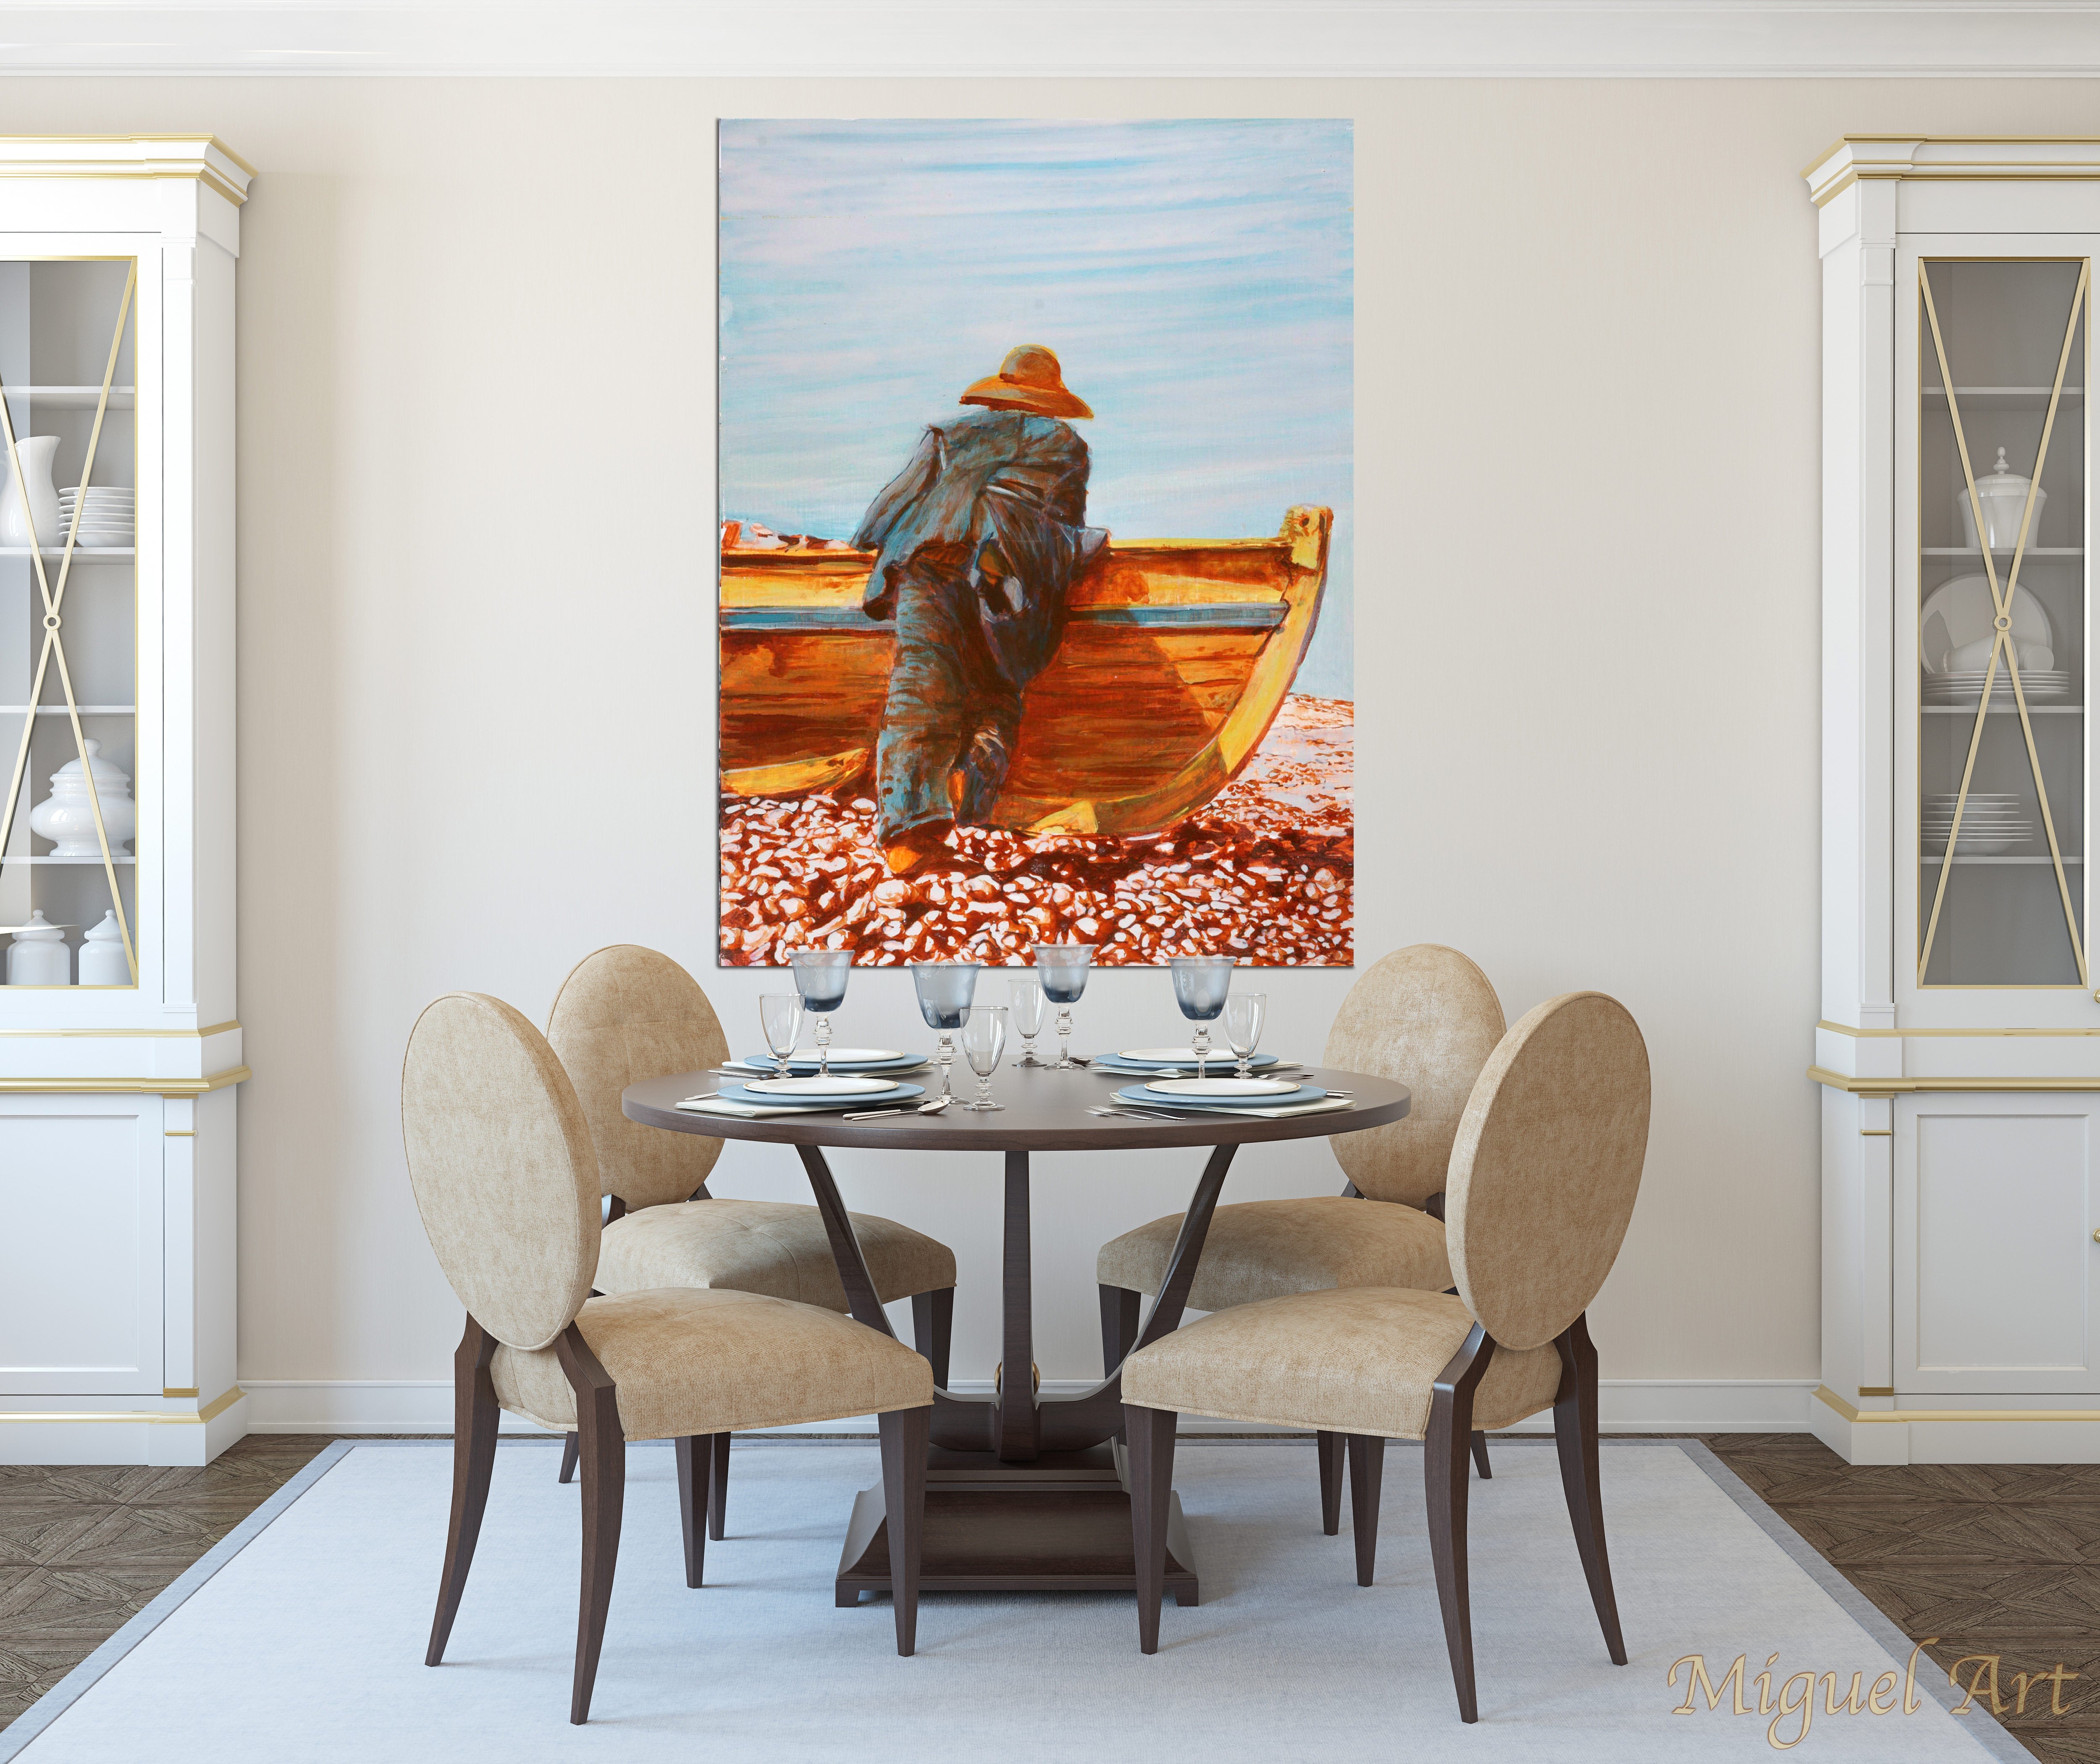 Painting of Pescador displayed in a dining room on a cream wall